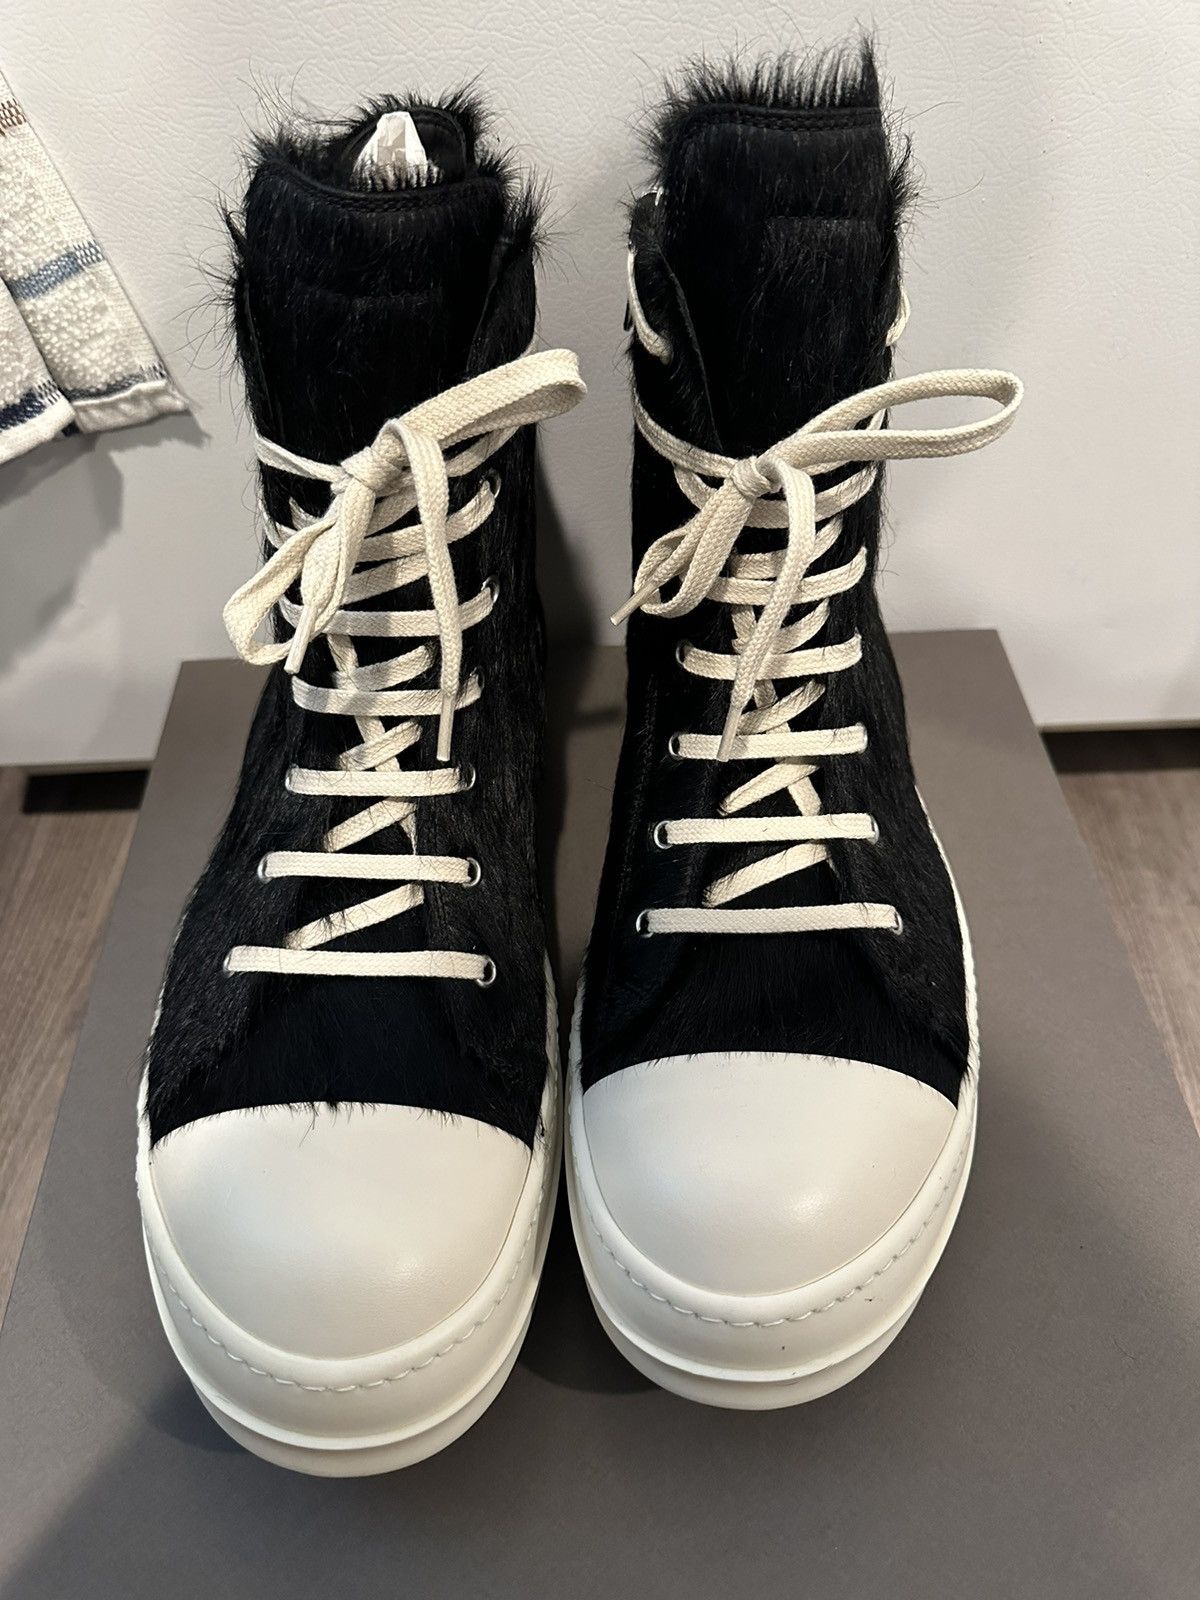 Pre-owned Rick Owens Pony Hair Ramones High Black Milk Size 45 Shoes